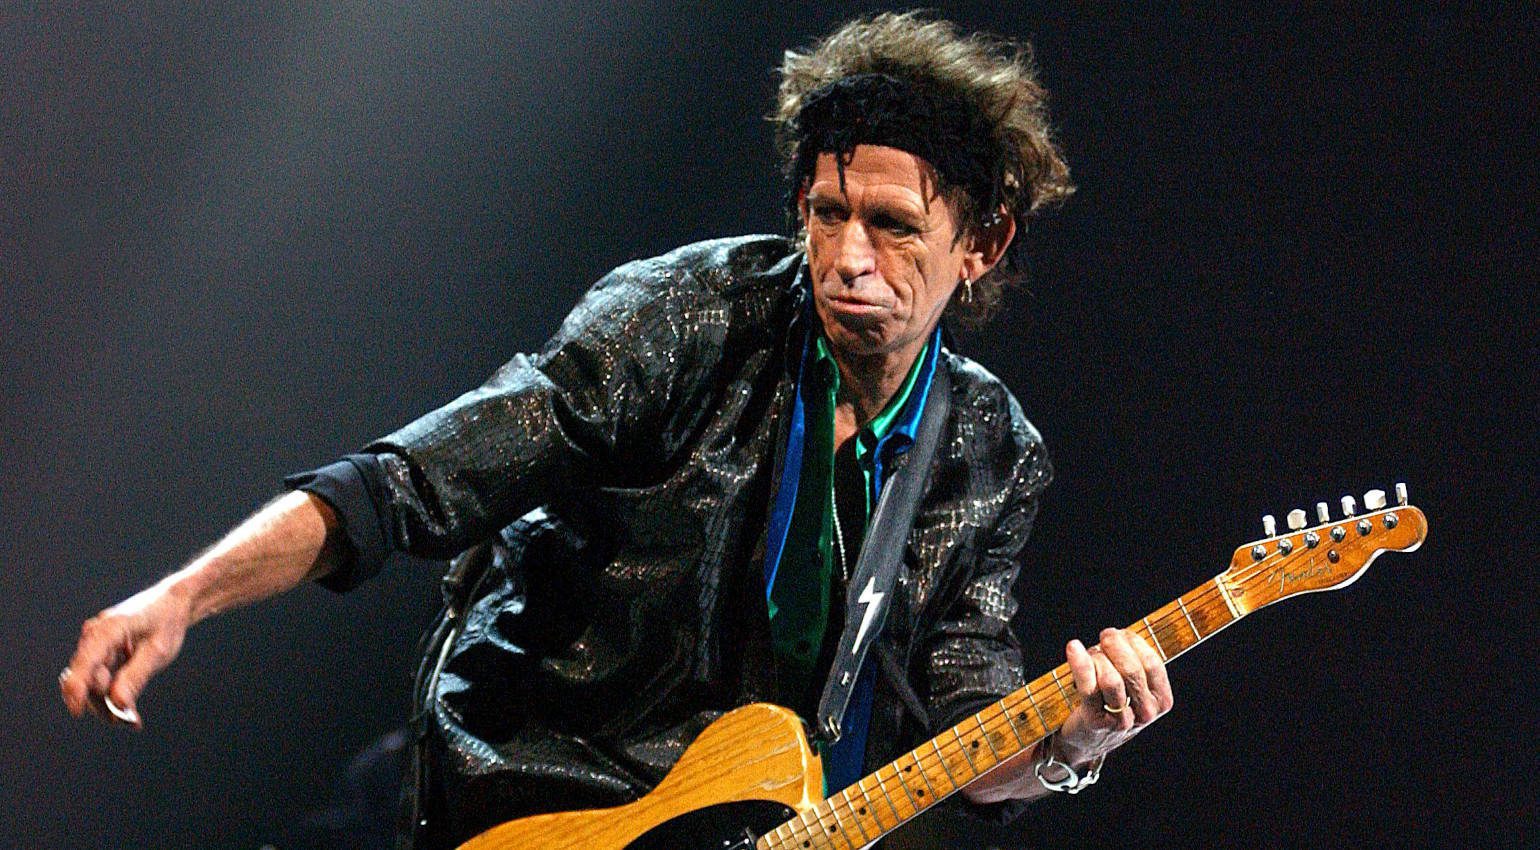 Keith Richards: Διασκεύασε  το “I’m Waiting for the Man” του Lou Reed